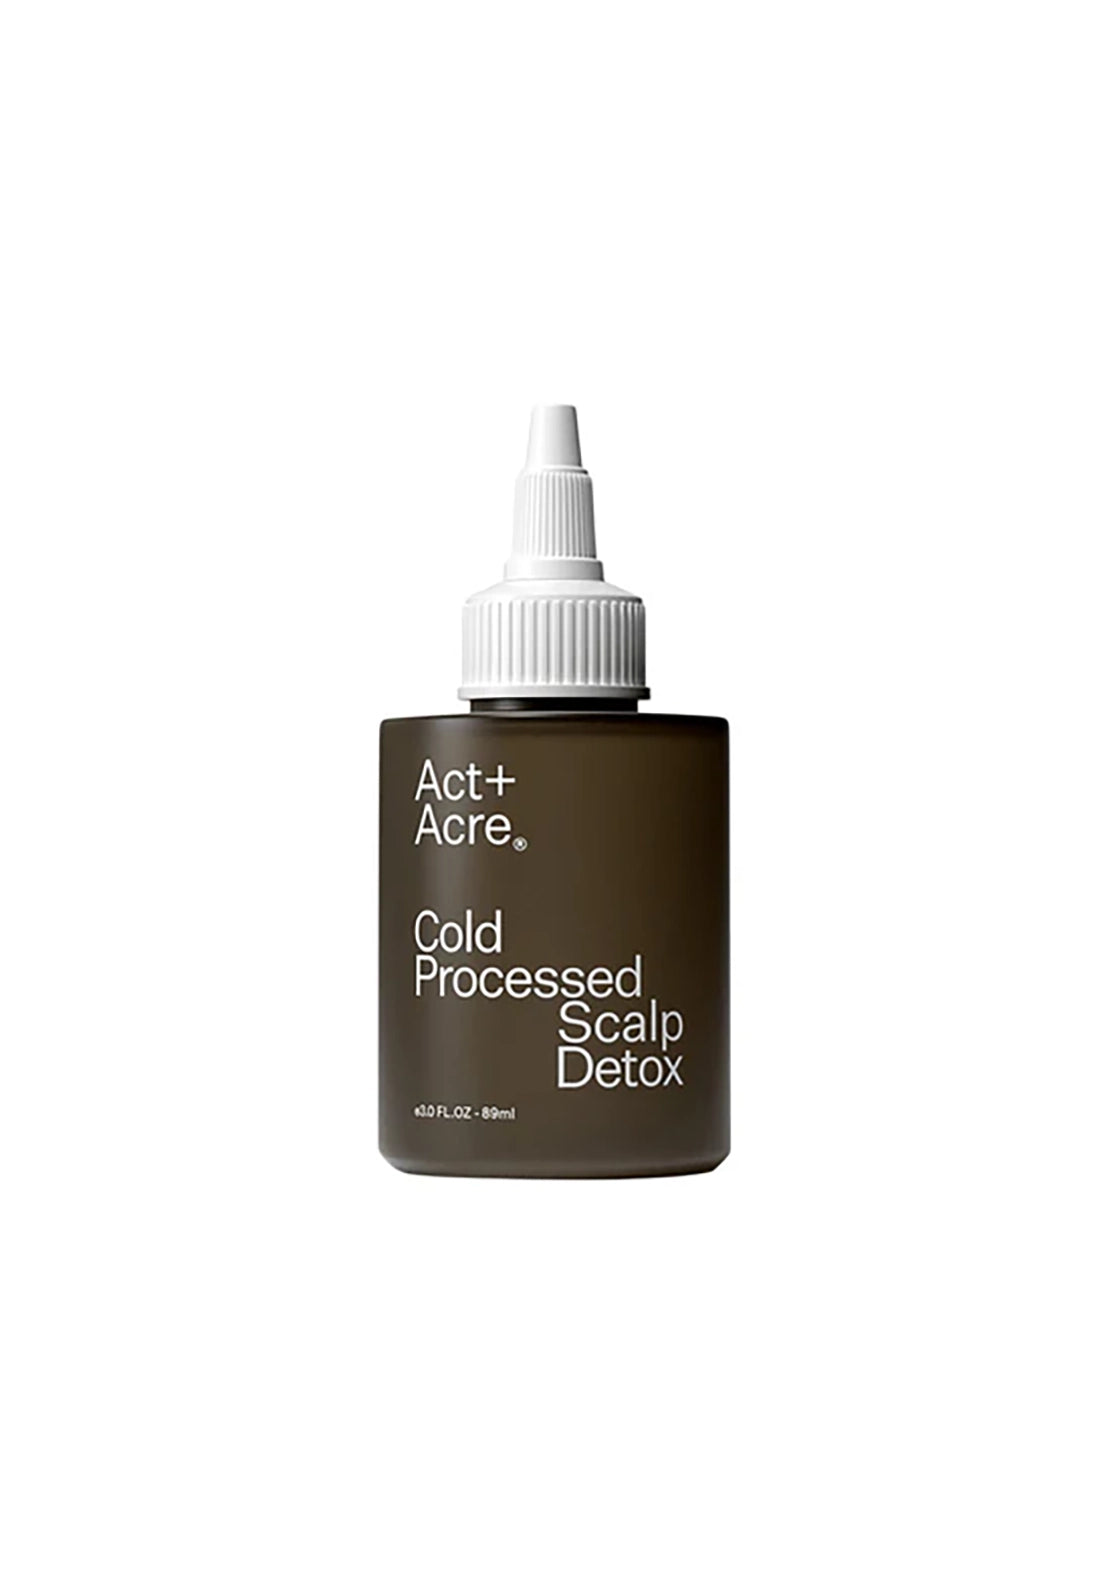 Act+acre Cold Processed Scalp Detox 1 Shaws Department Stores